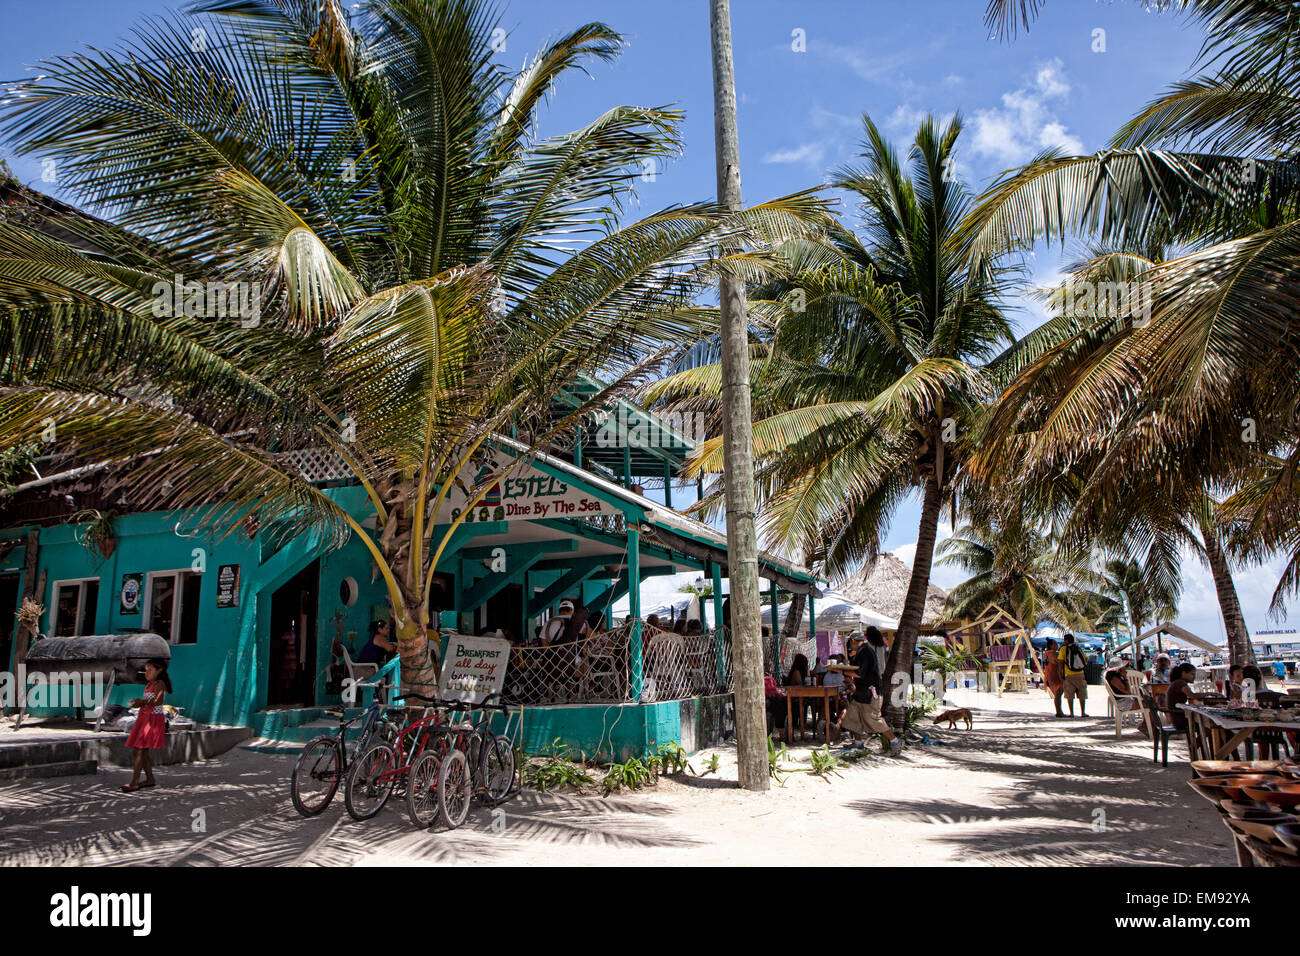 Estel's Restaurant and Bar on Ambergris Caye, Belize, South America. Stock Photo